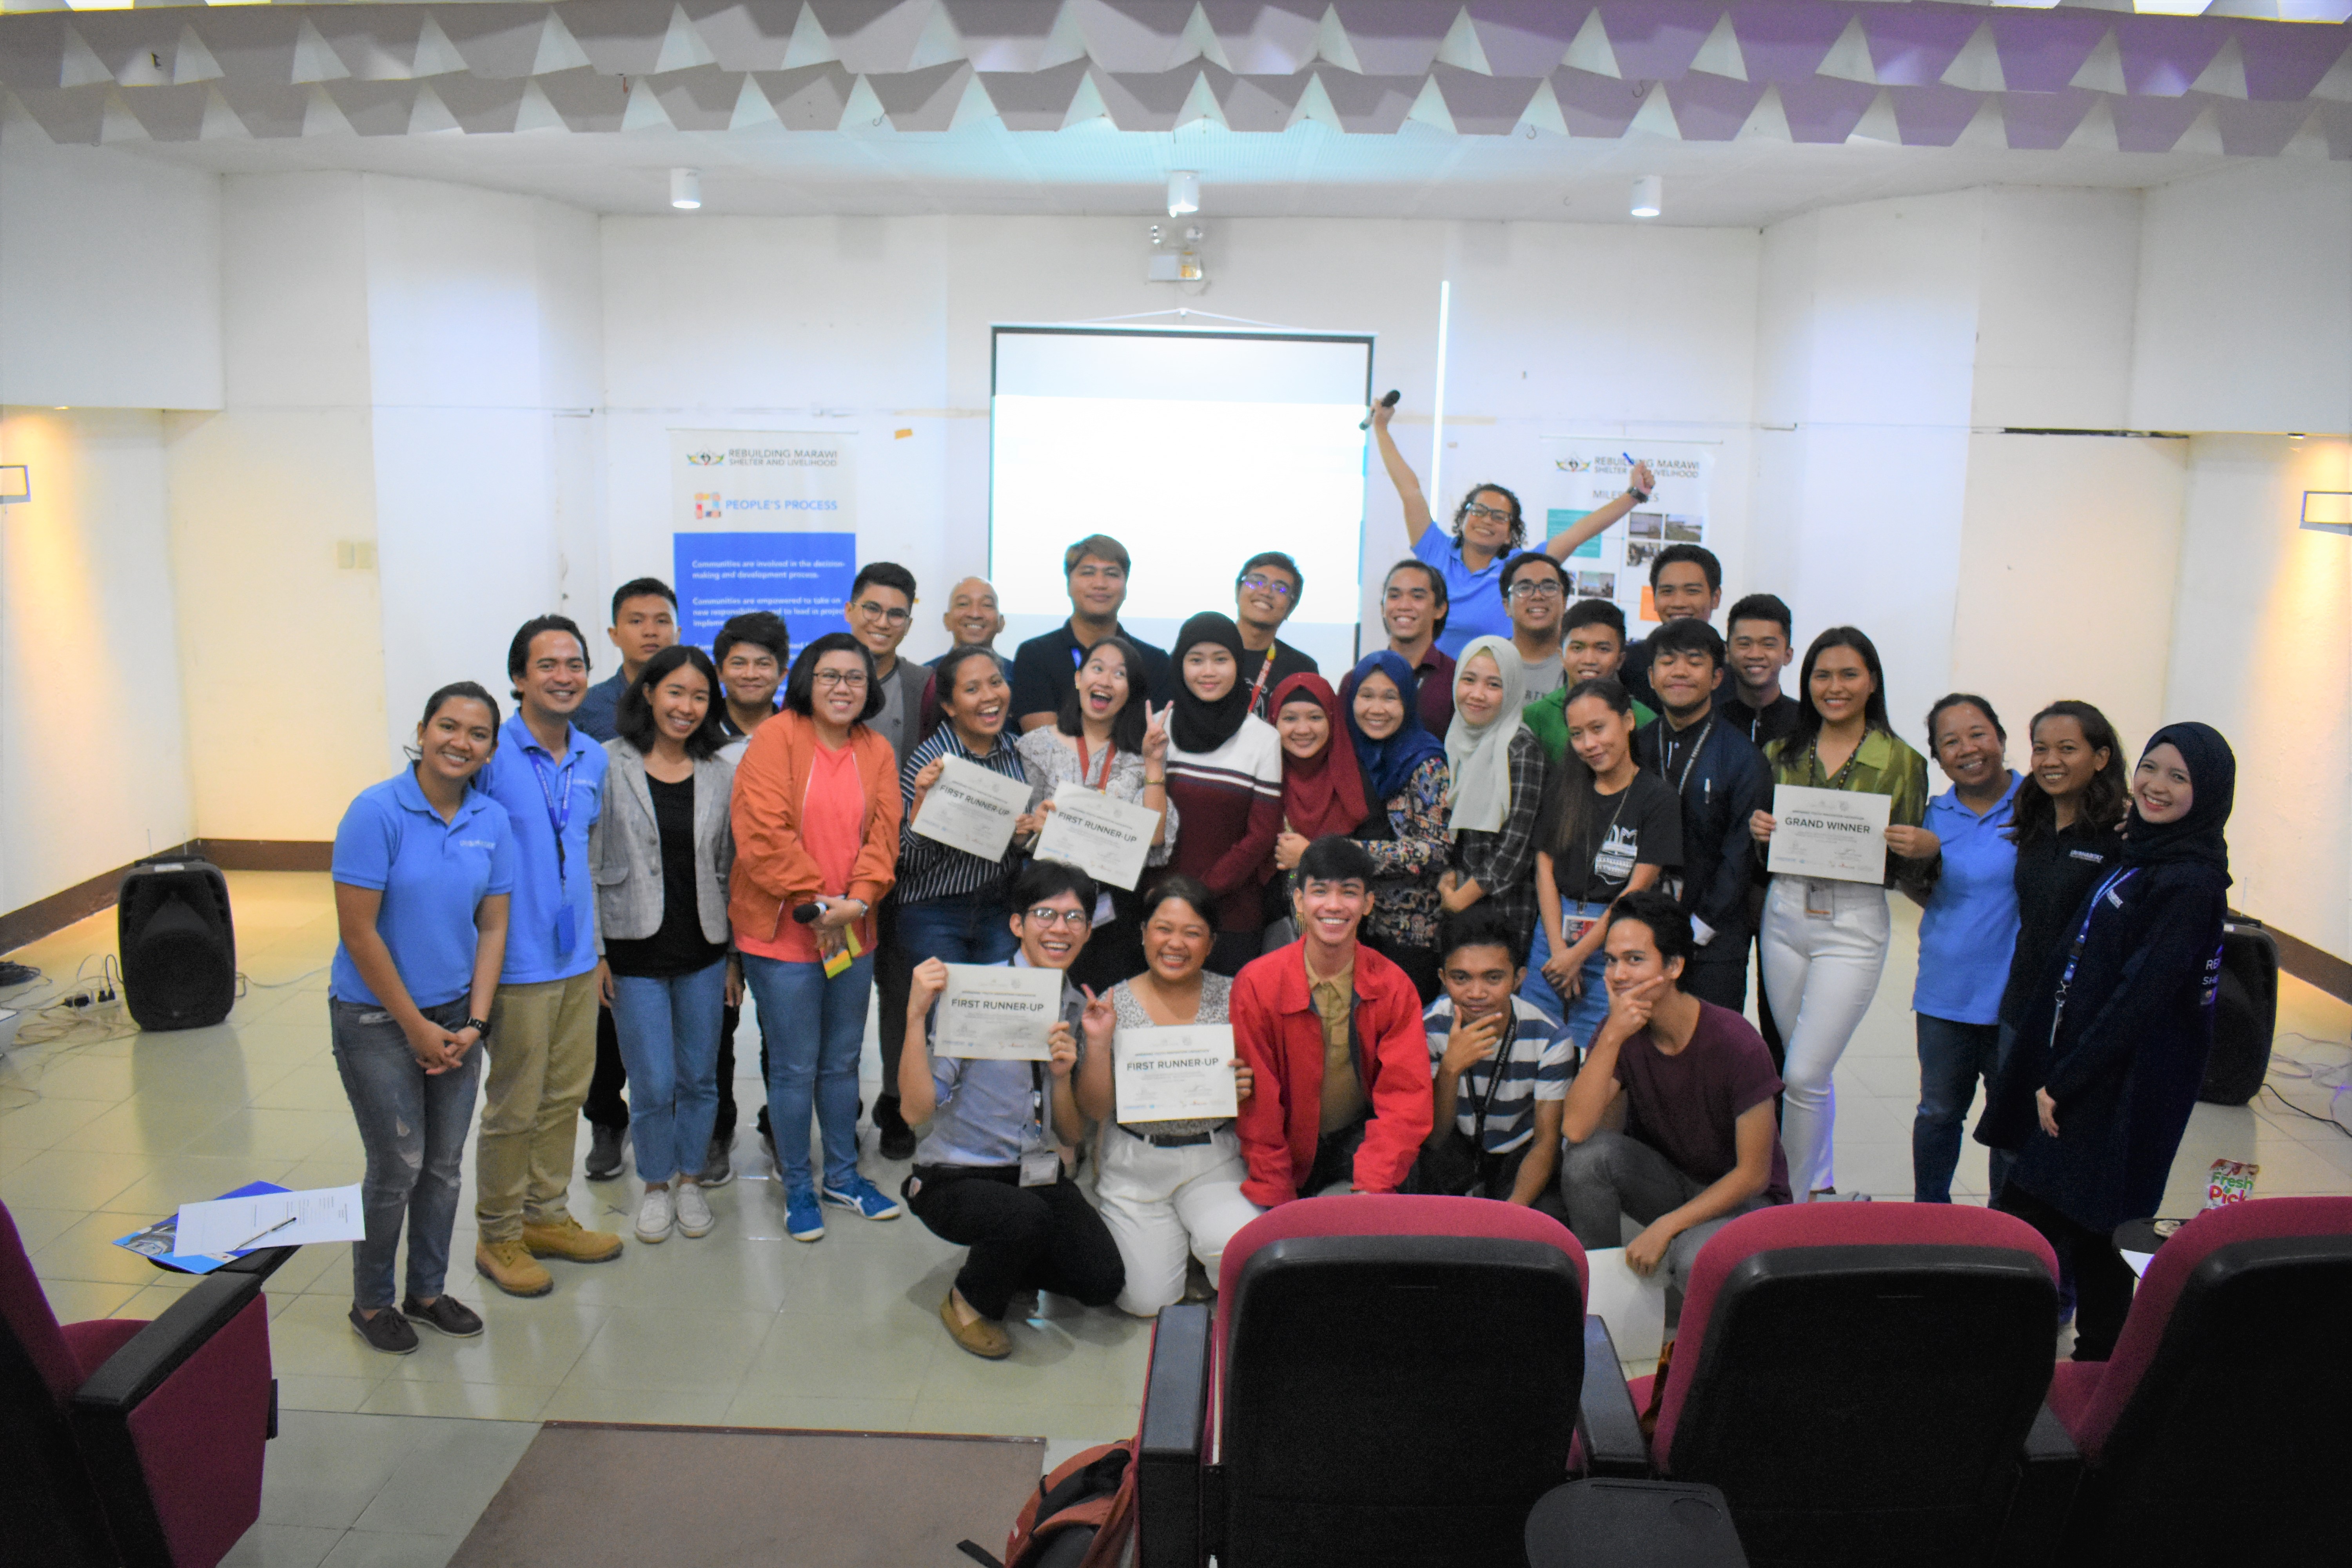 The Mindanao Youth Innovation Hackathon showcased the creativity and innovativeness of students in the call to offer solutions for sustainable water and solid waste management.